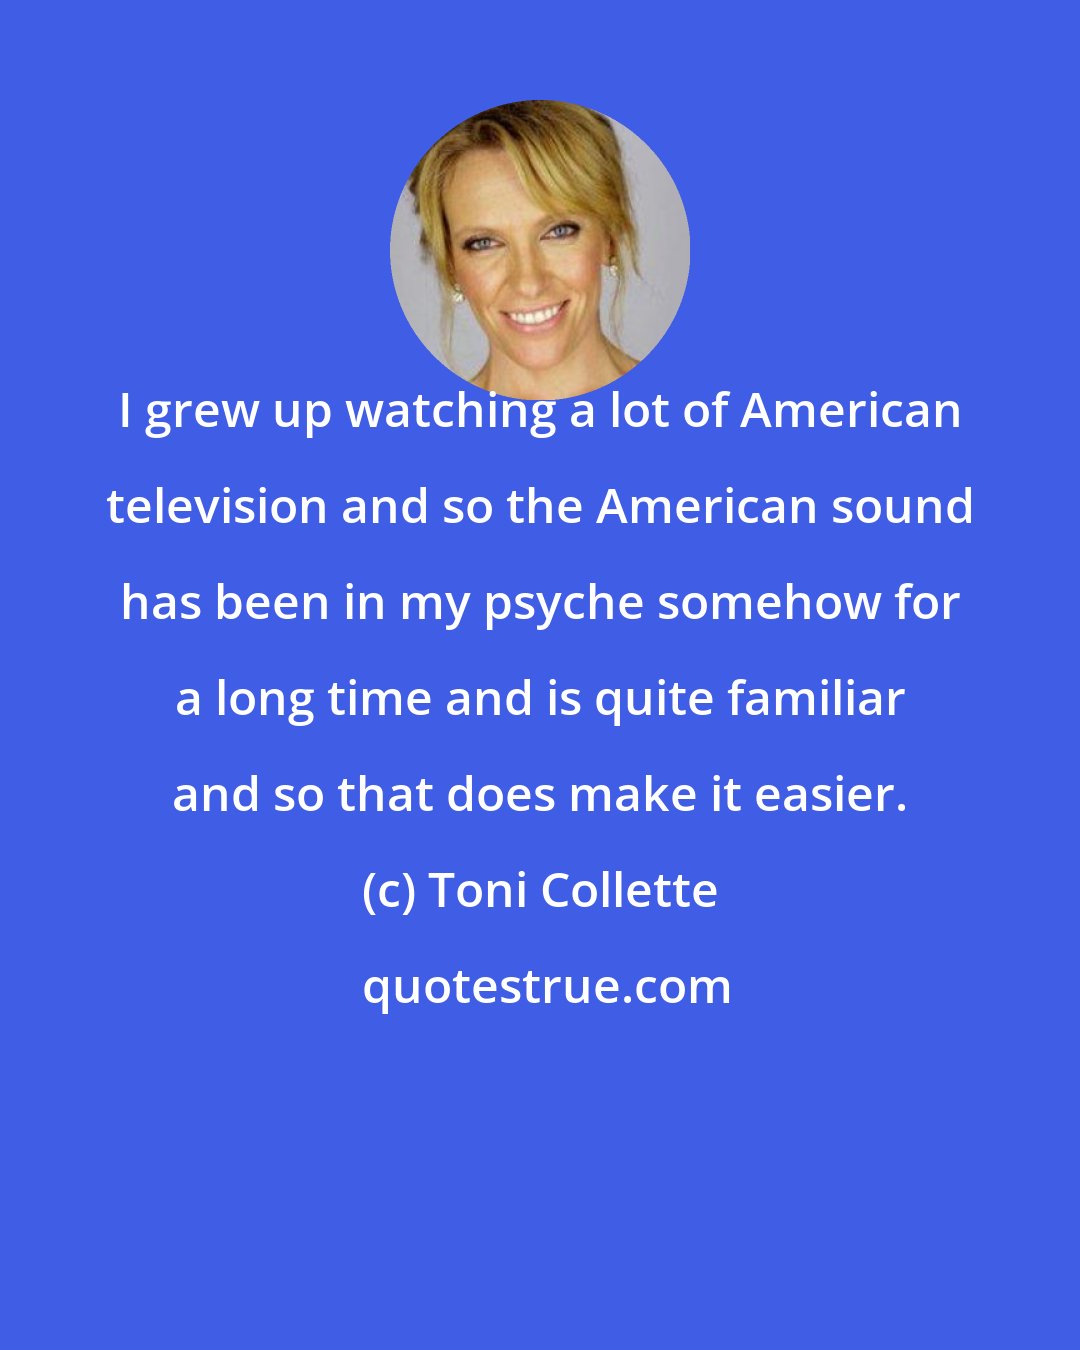 Toni Collette: I grew up watching a lot of American television and so the American sound has been in my psyche somehow for a long time and is quite familiar and so that does make it easier.